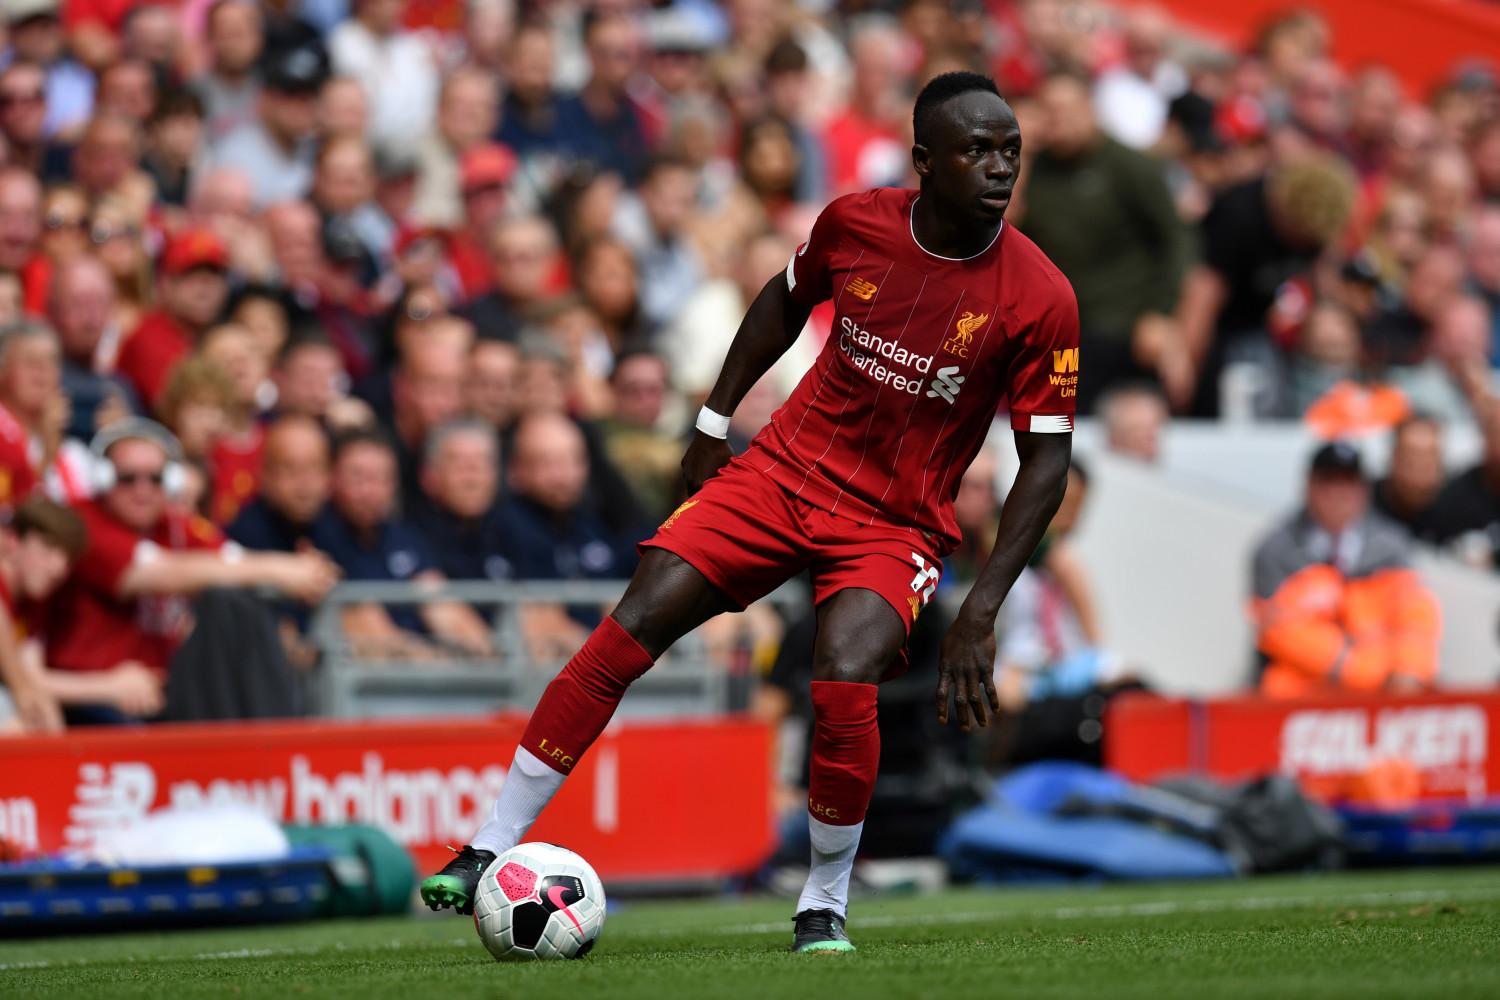 Mane, African players in Europe